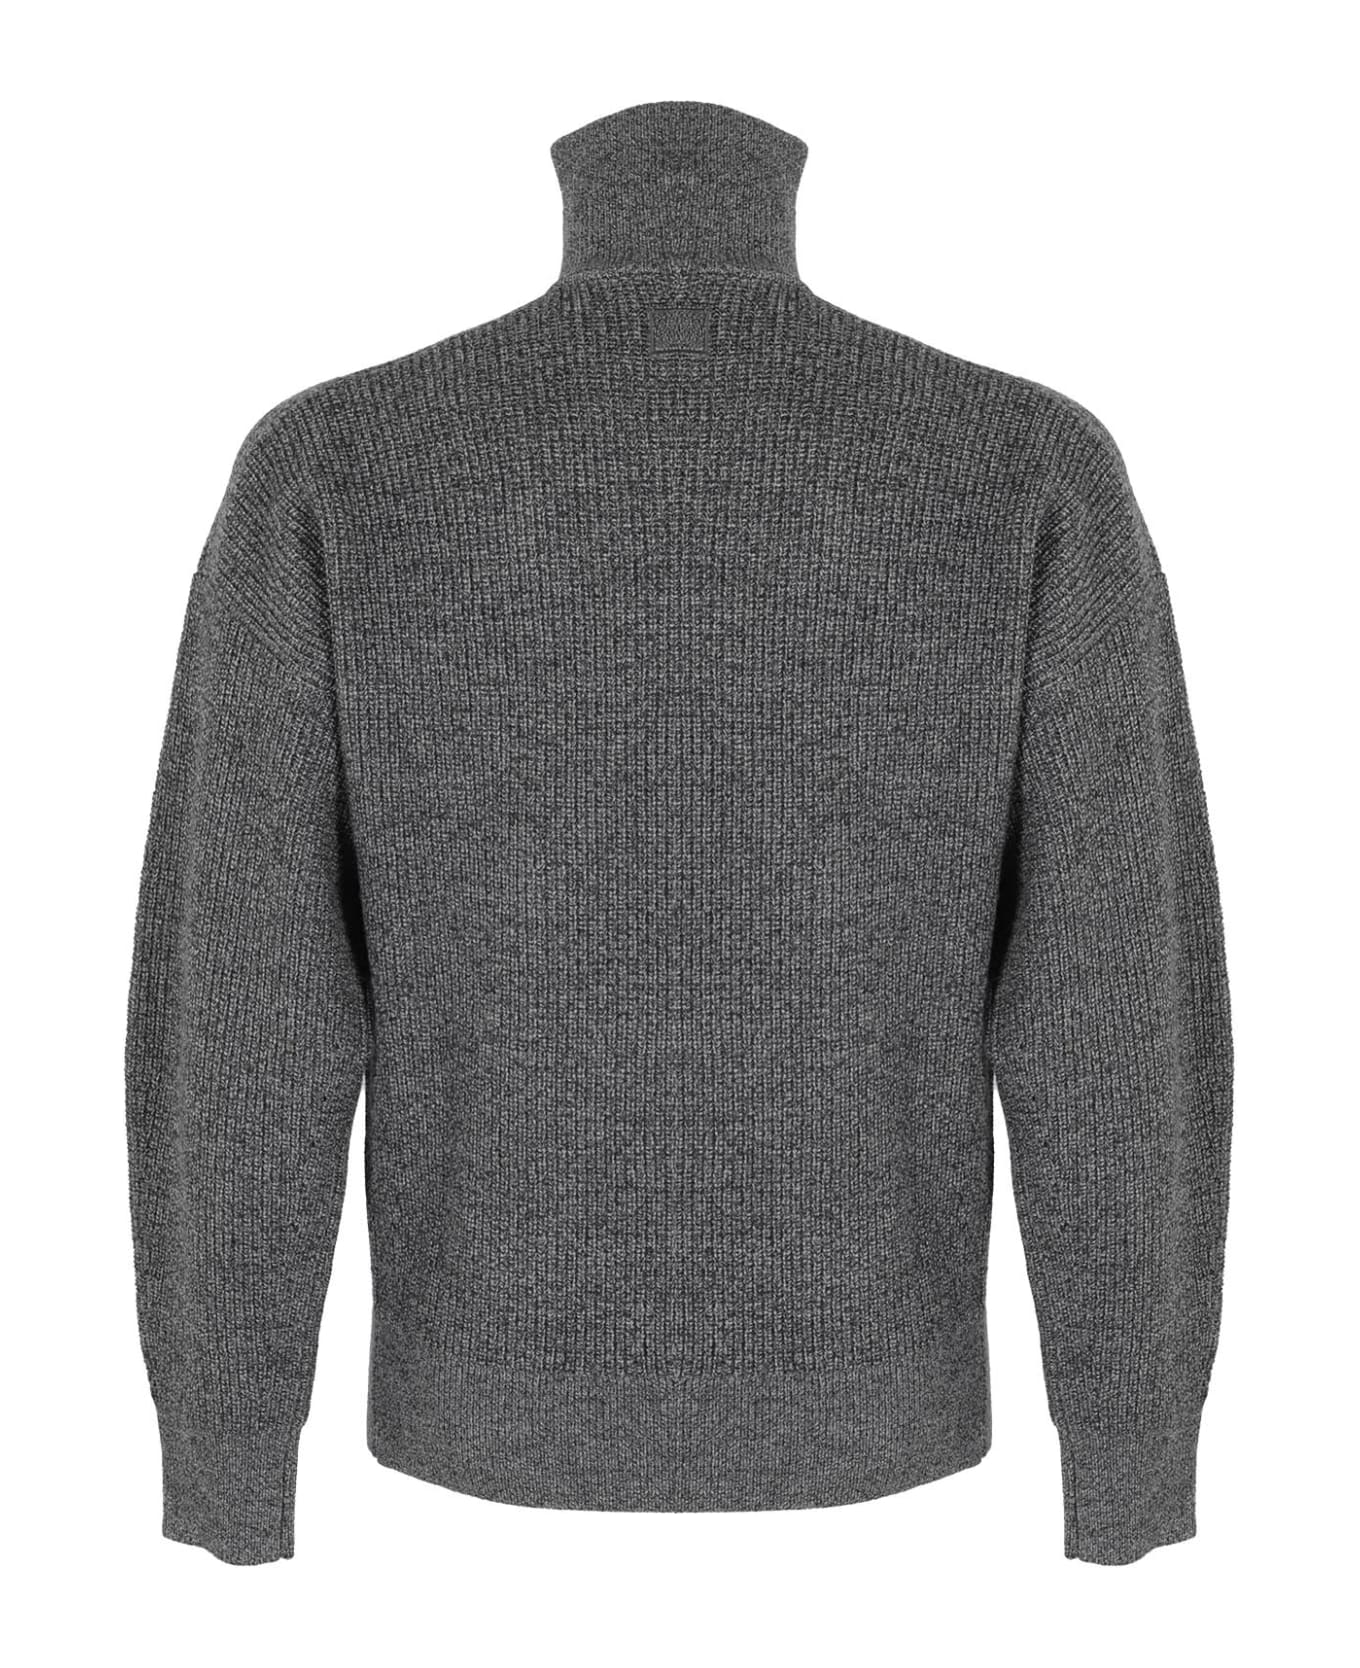 Isabel Marant Benny Sweater - An